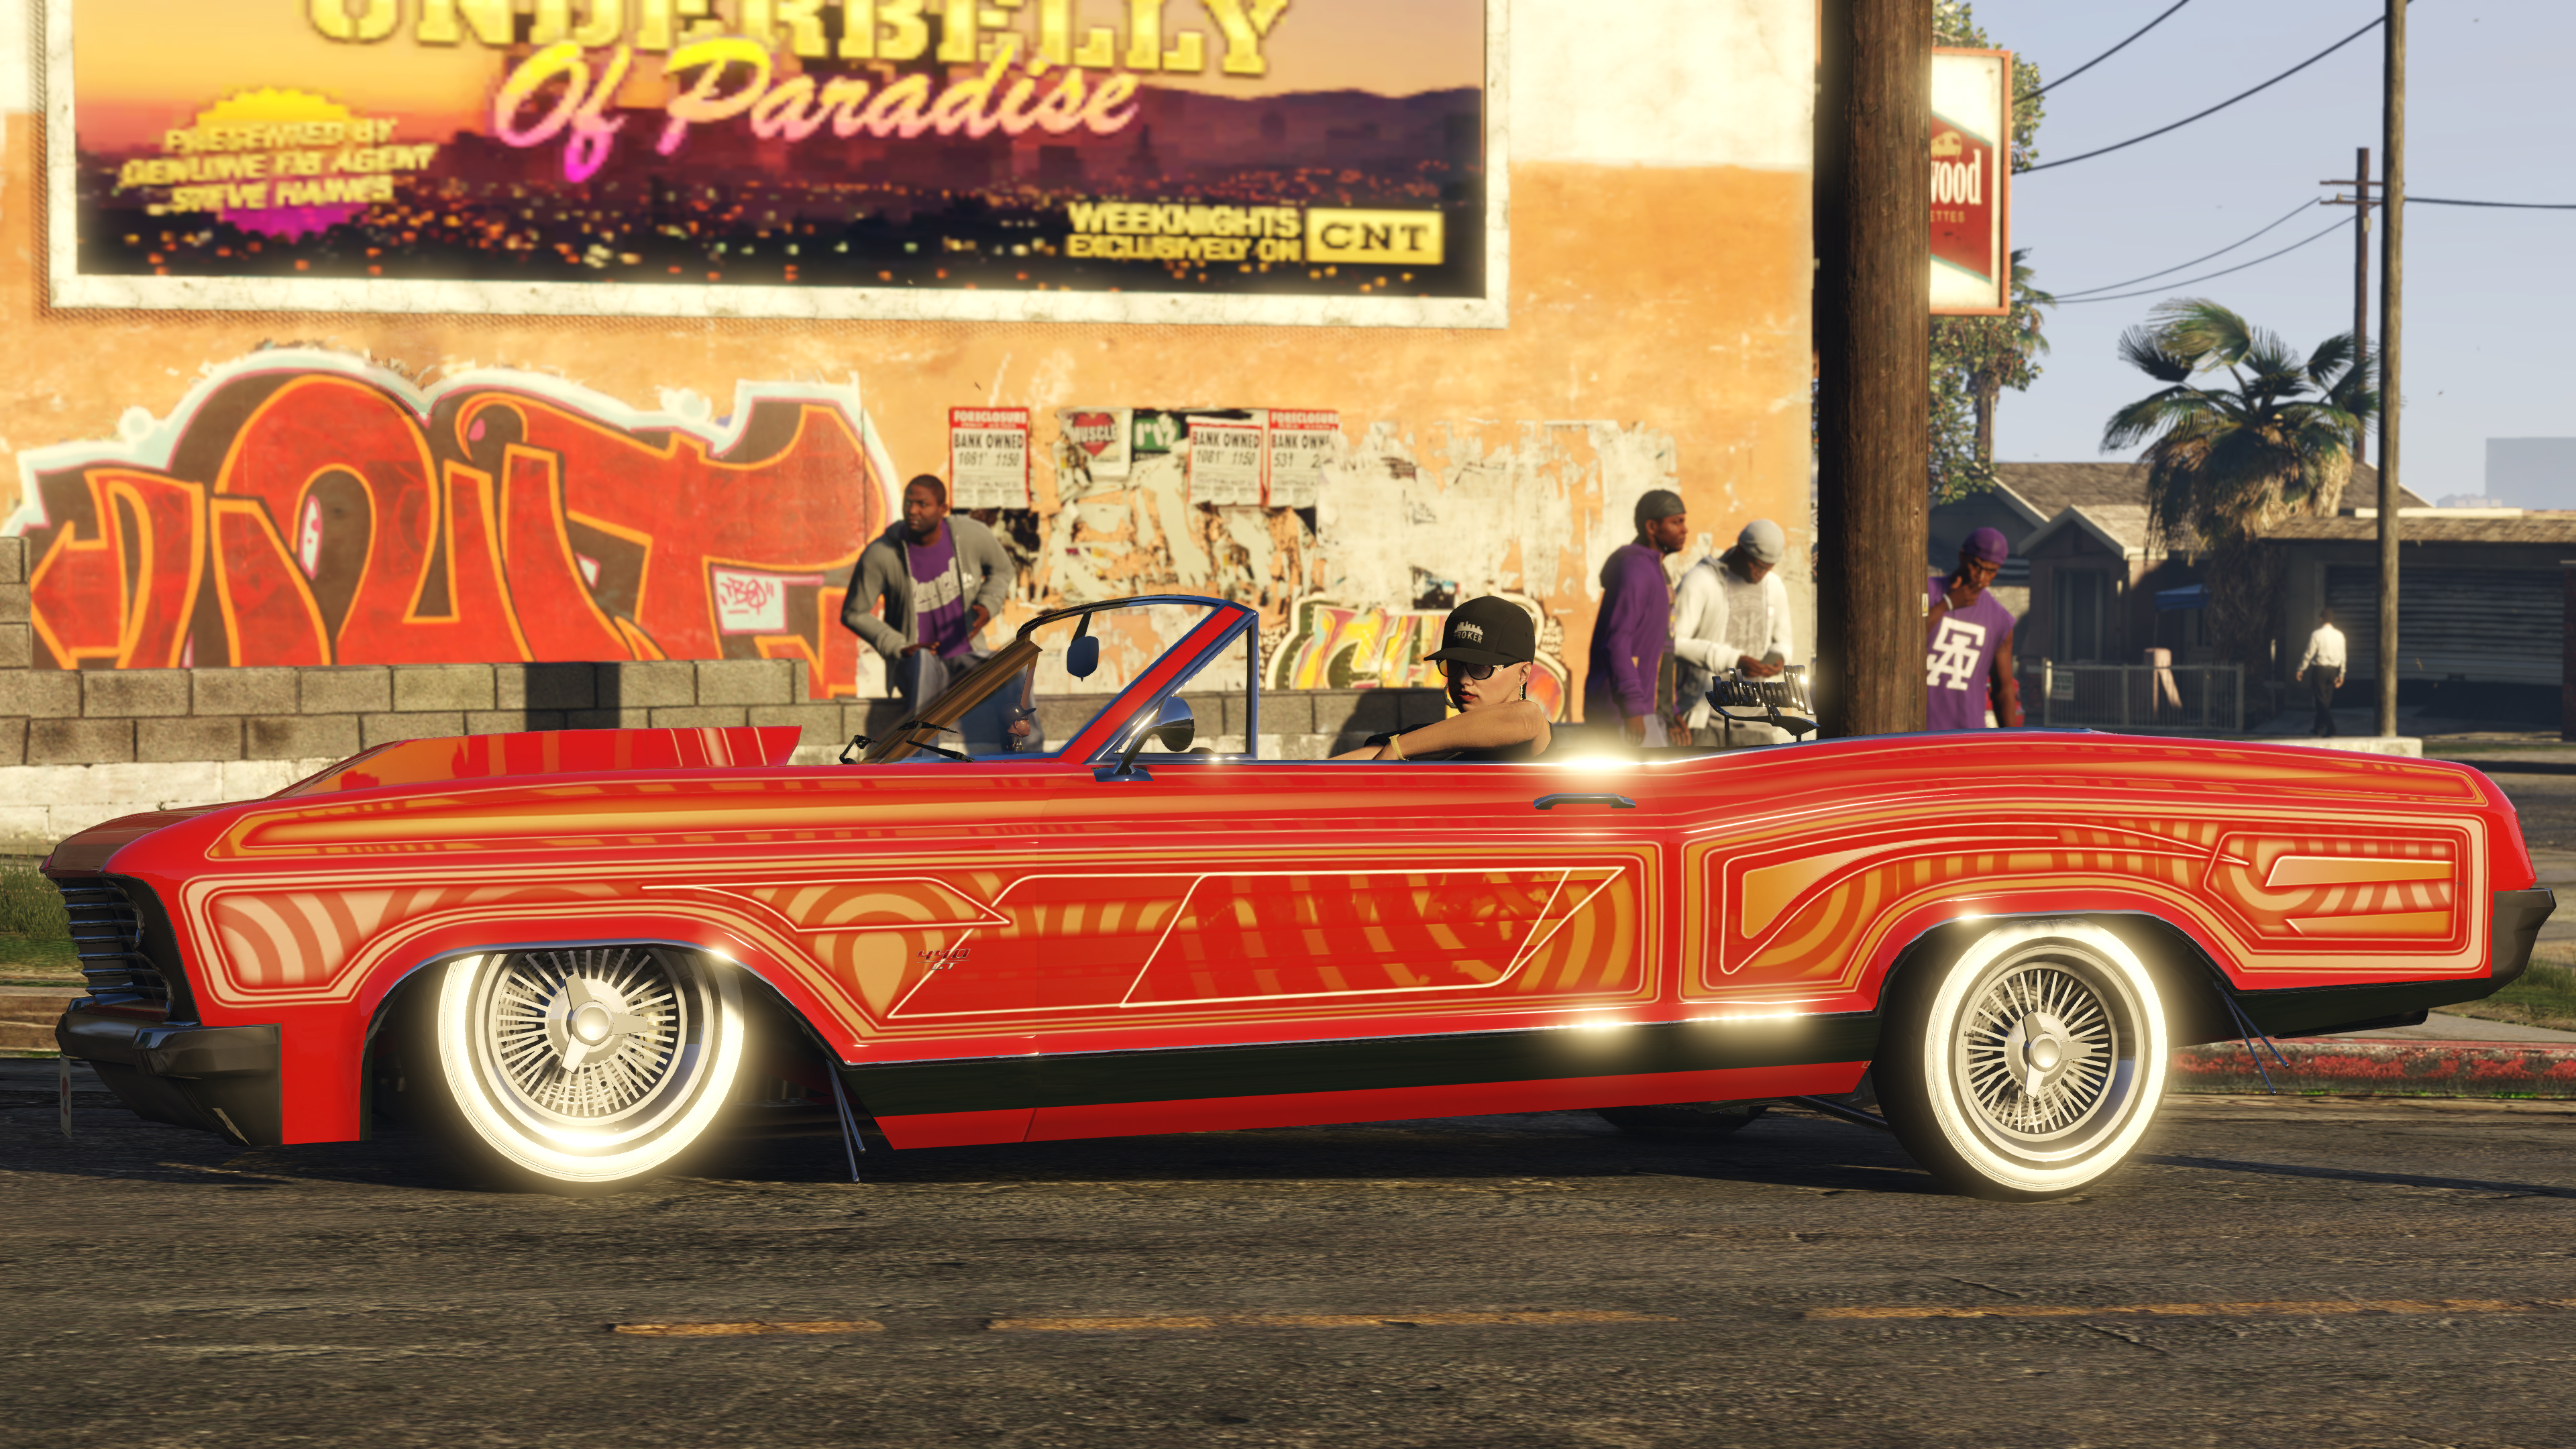 HQ Lowrider Wallpapers | File 4297.48Kb